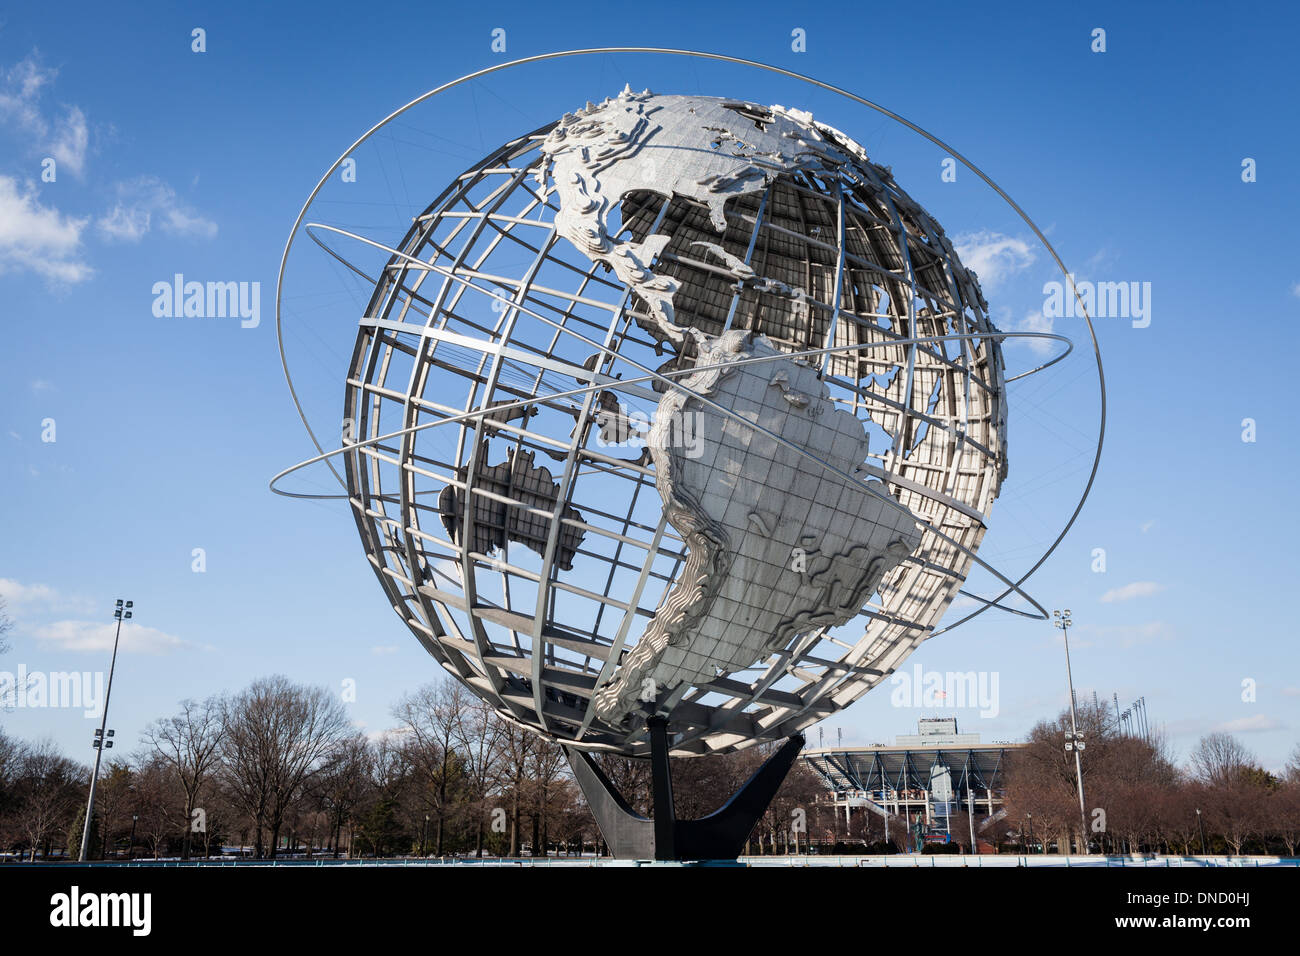 Unisphere, stainless steel, 12 stories high, built for 1964 World's Fair, Flushing Meadows, Queens, New York Stock Photo